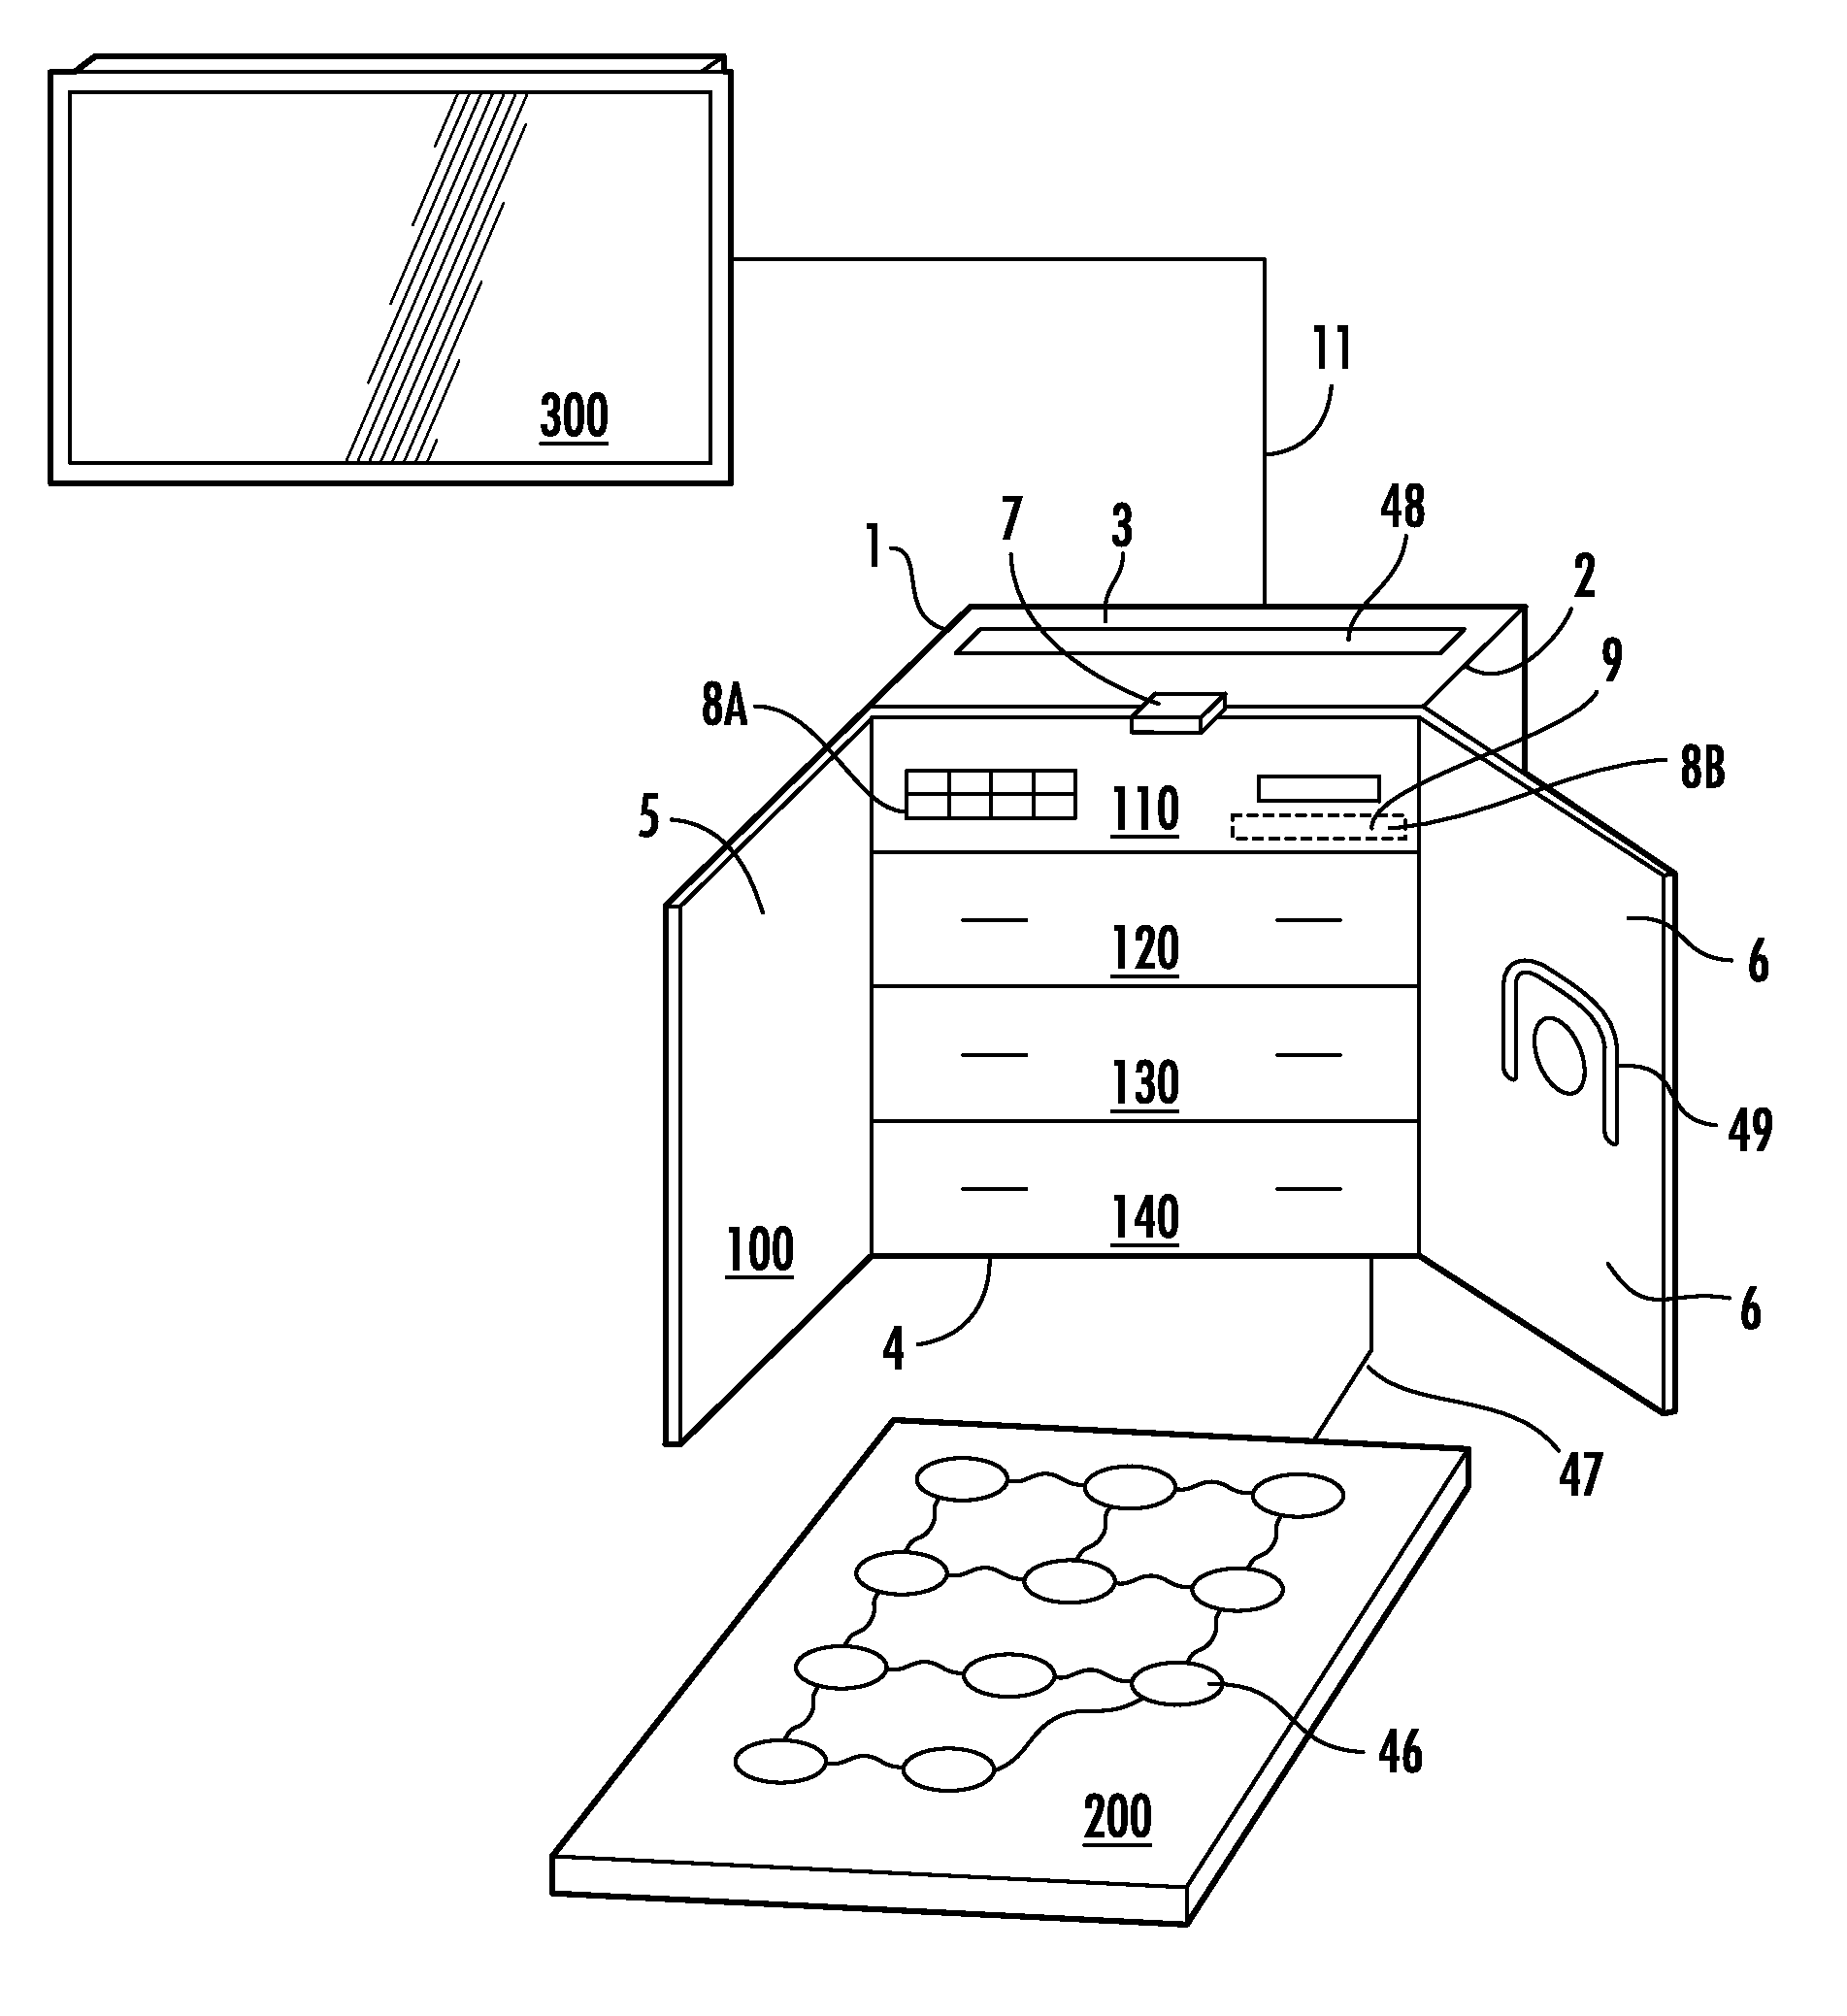 Exercise system with feedback analysis and related methods